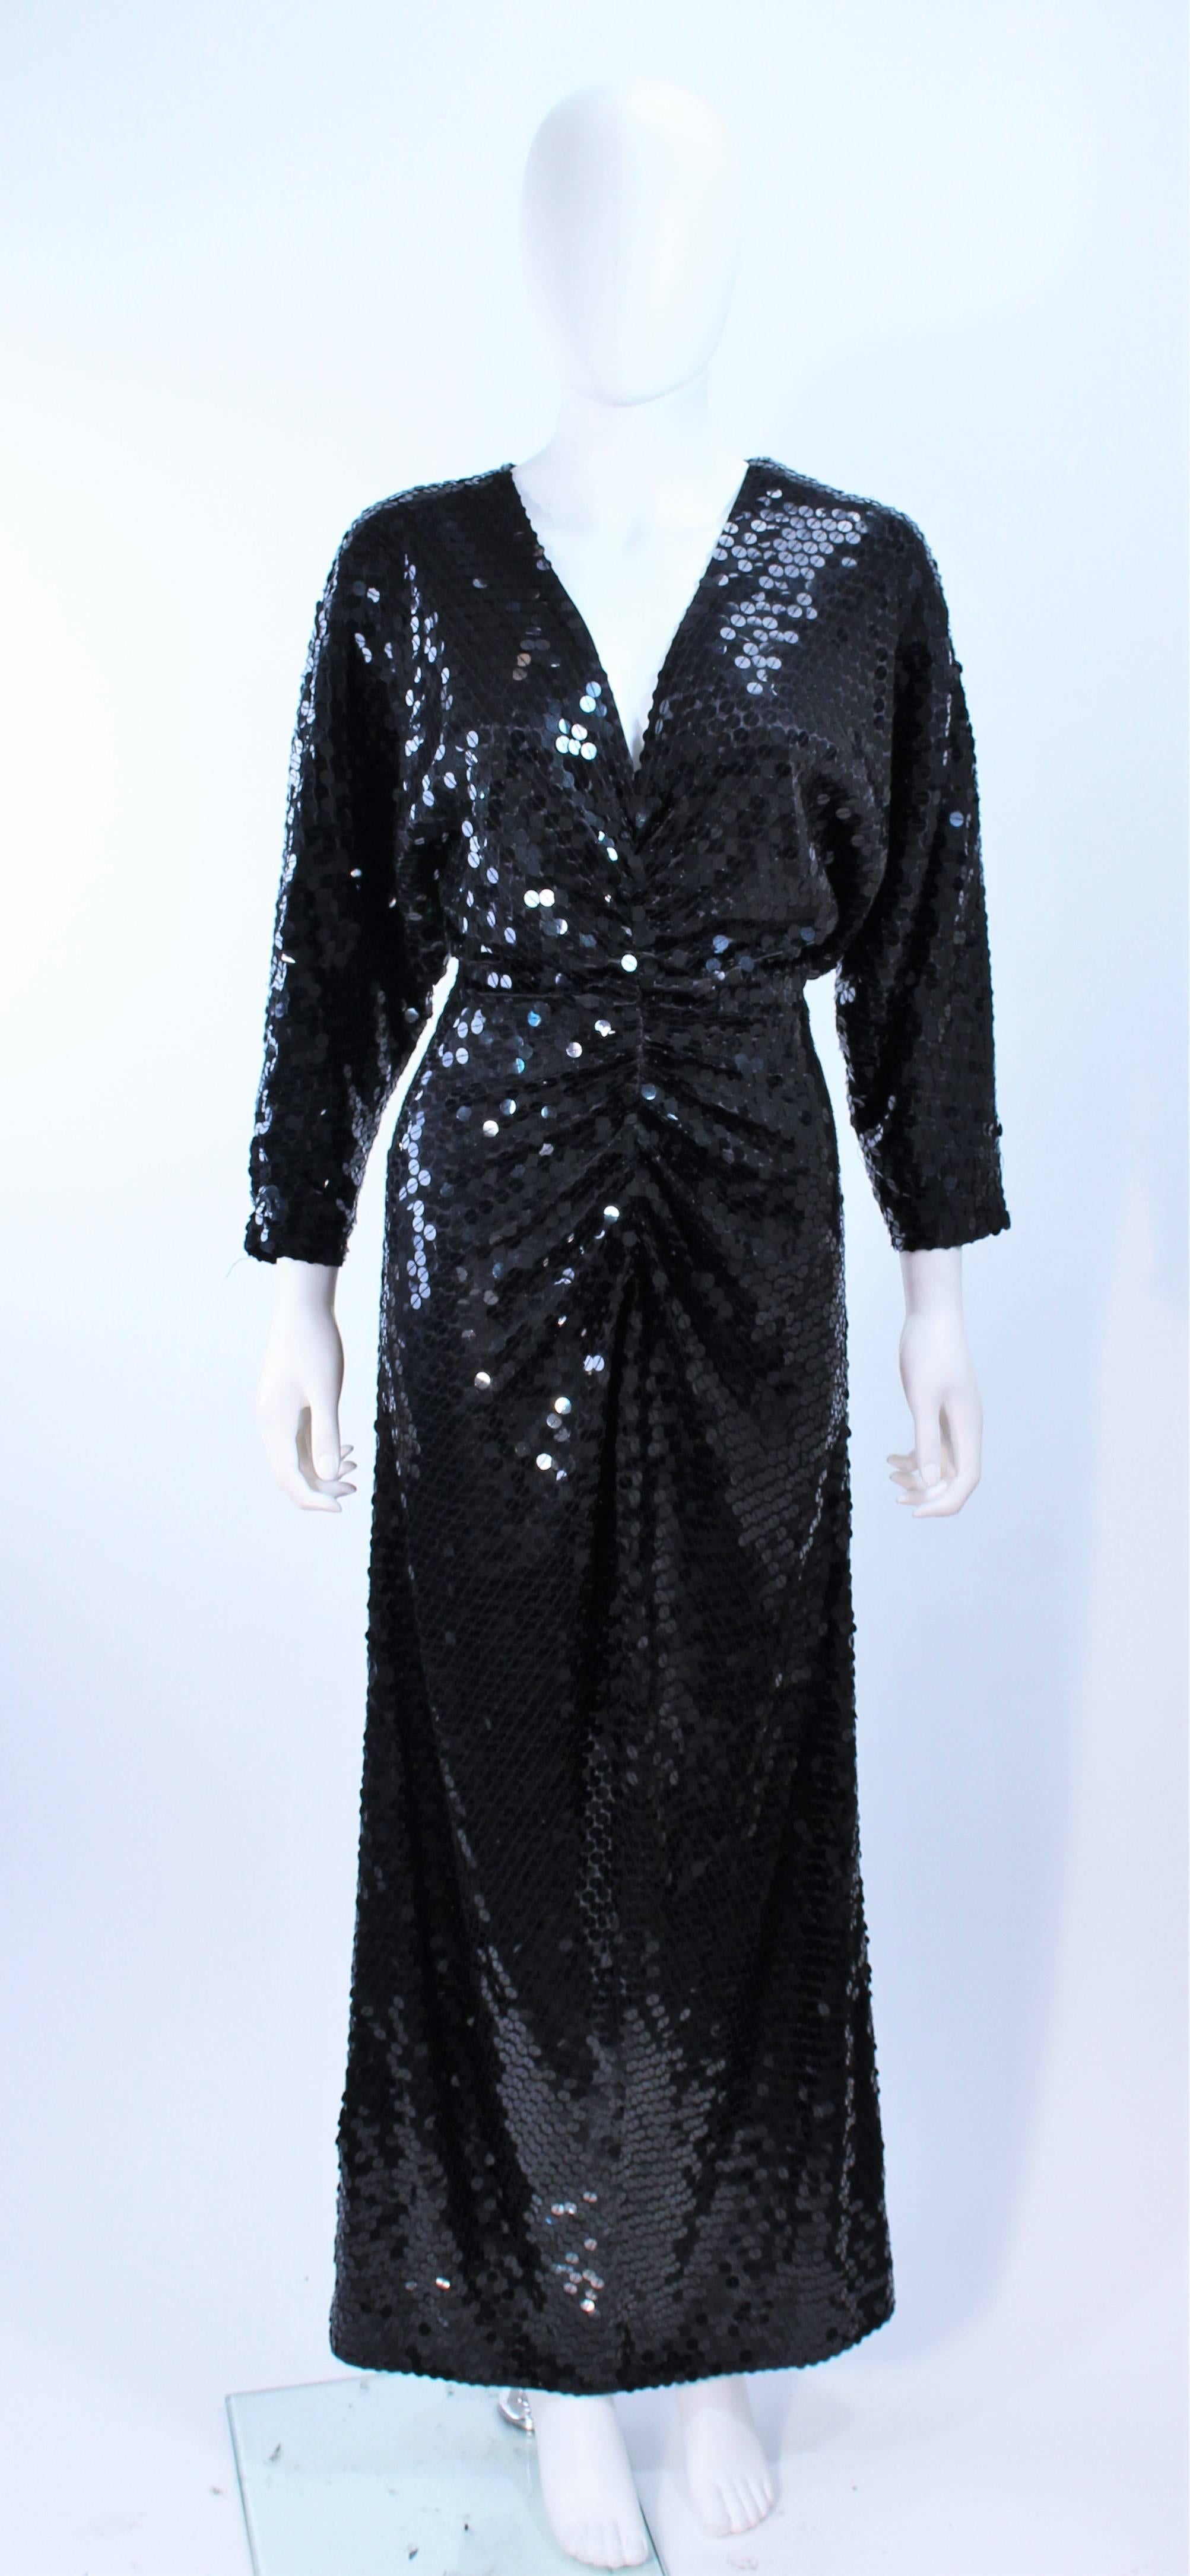 This Oleg Cassini is composed of a sequined black jersey. Features a draped front with center back zipper closure. In excellent vintage condition.

**Please cross-reference measurements for personal accuracy. Size in description box is an